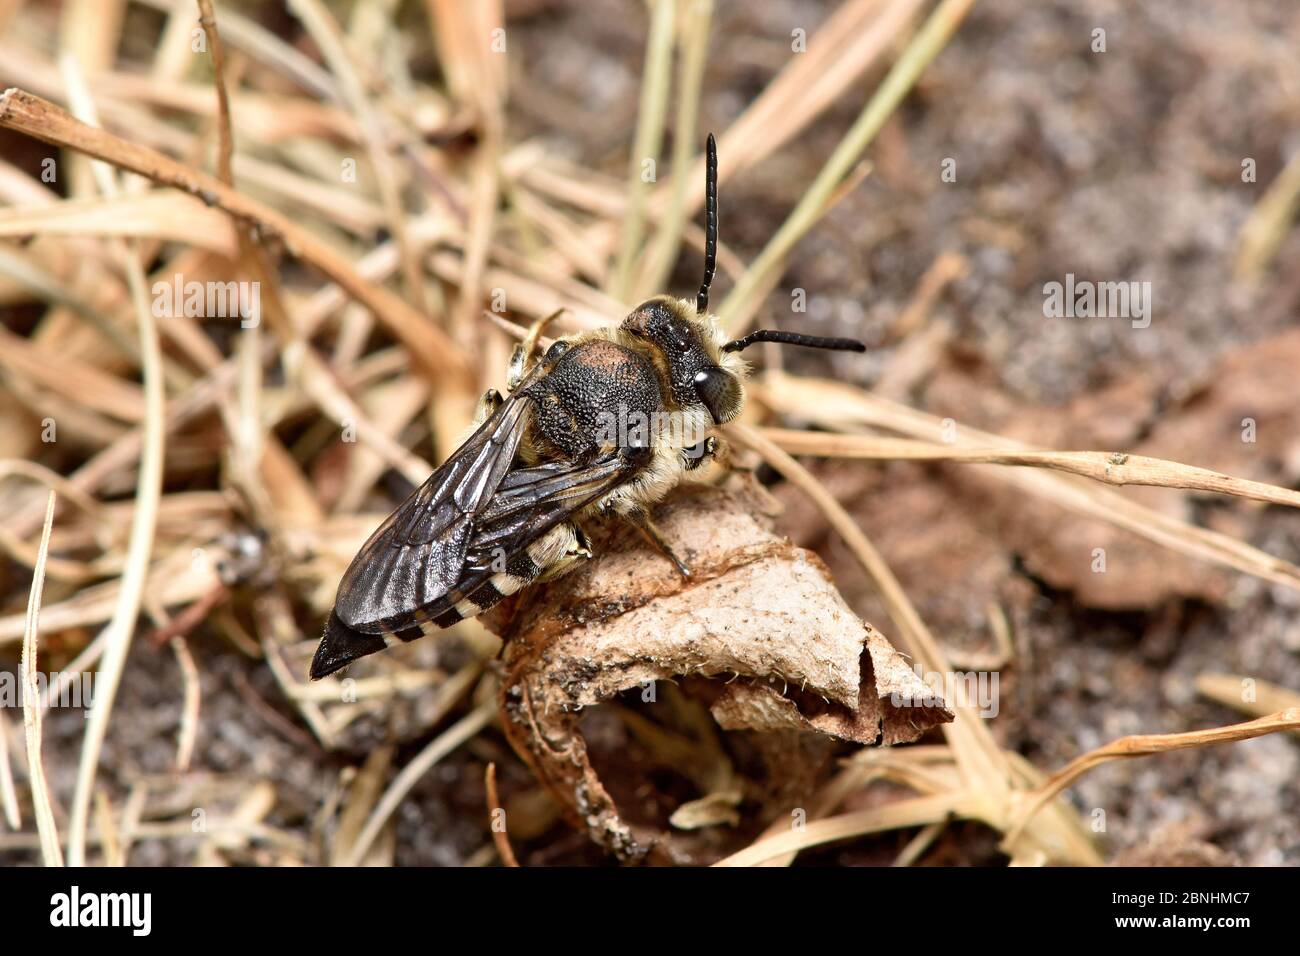 Sharp-tailed bee (Coelioxys conoidea) cleptoparasite of Leaf cutter bee (Megachile maratima) these bees use their sharp tail to slice into the nest of Stock Photo